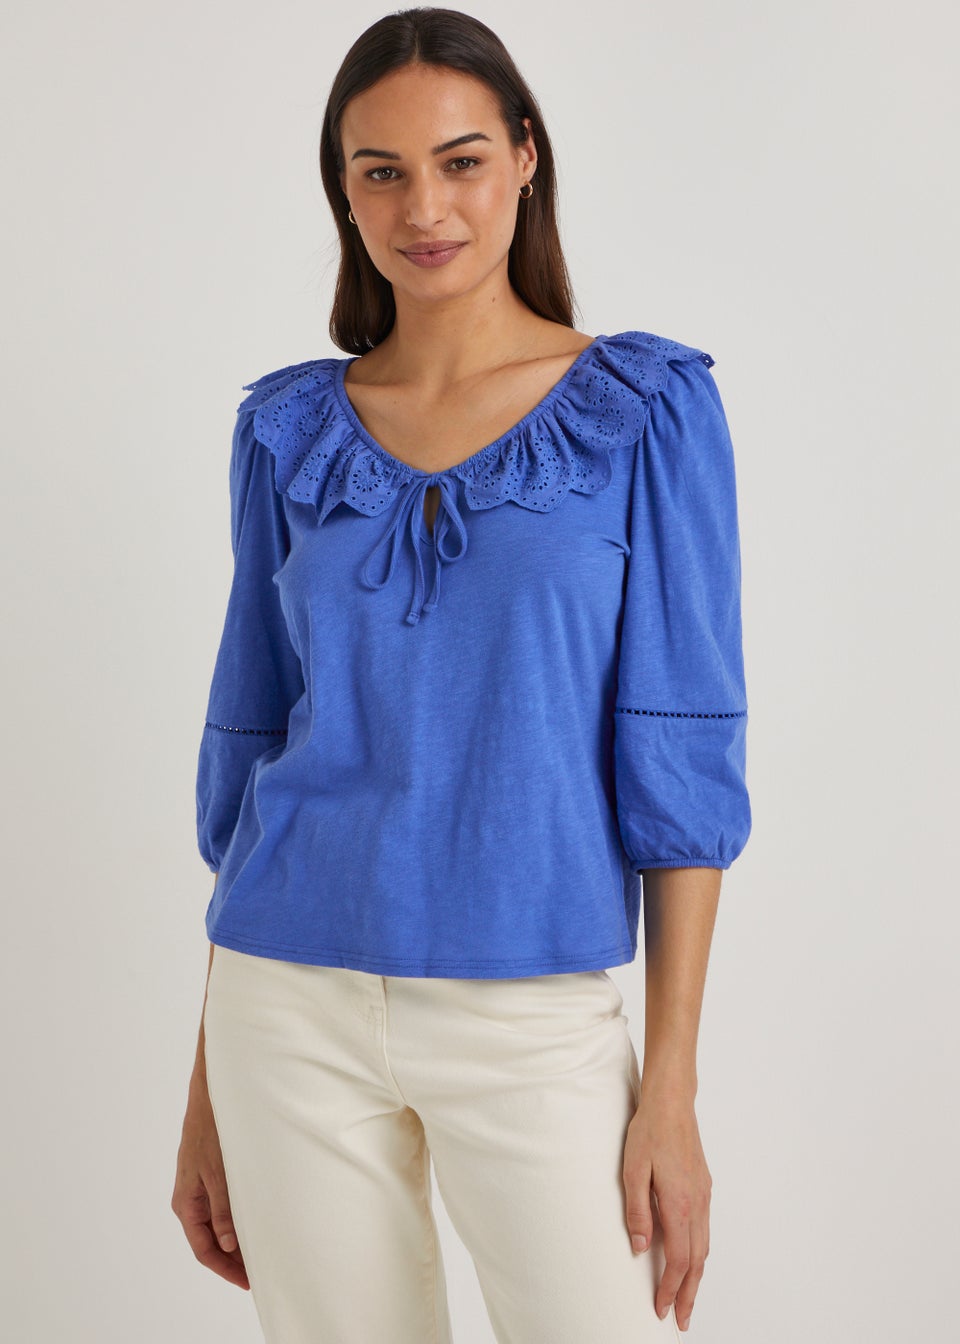 Blue Lace 3/4 Sleeve Top